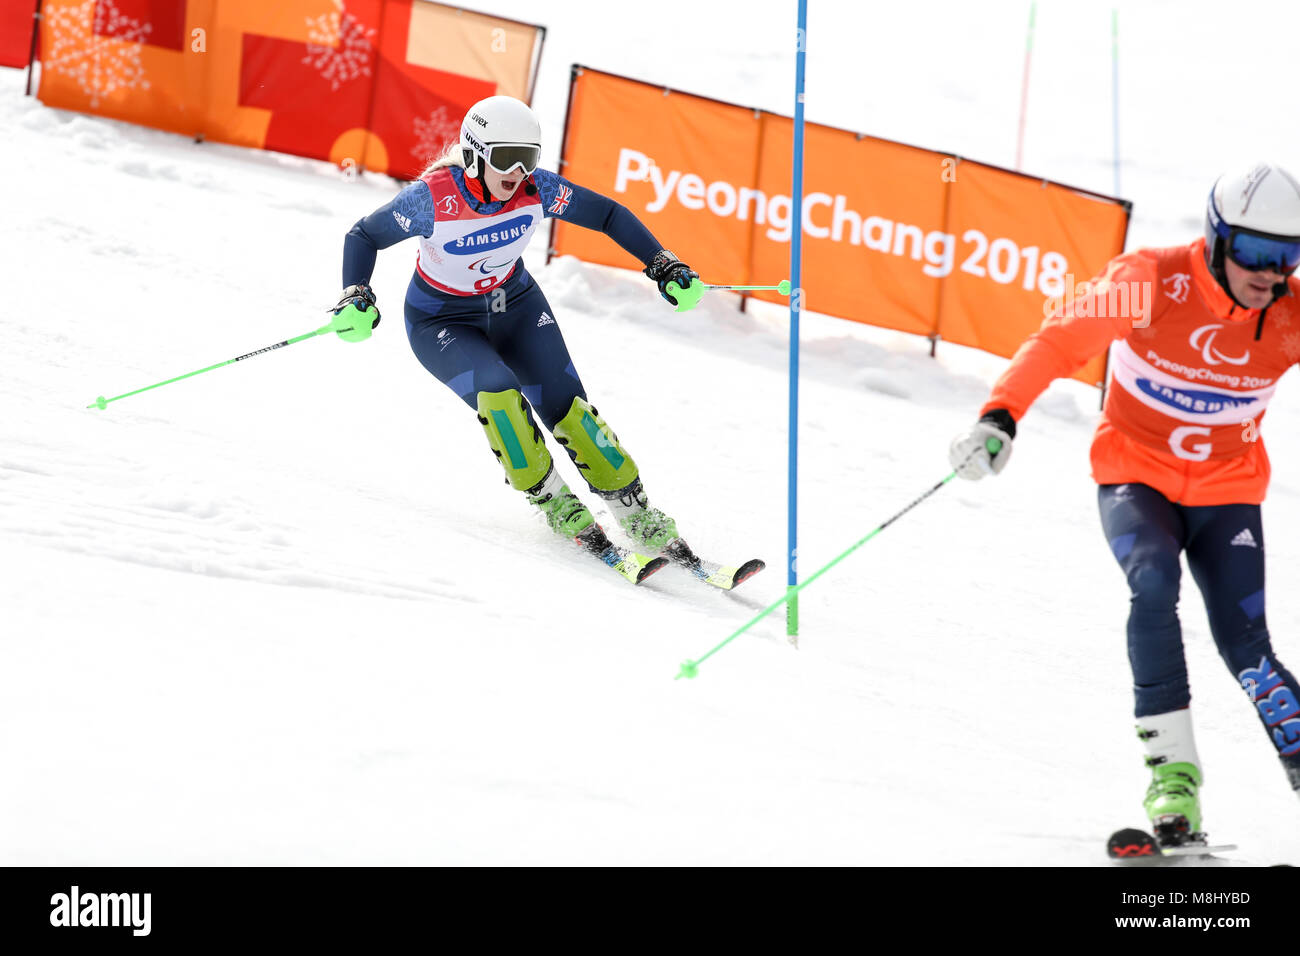 PyeongChang 18th March . Women's Slalom. Team GB - GALLAGHER Kelly  Guide: SMITH Gary Credit: Marco Ciccolella/Alamy Live News Stock Photo